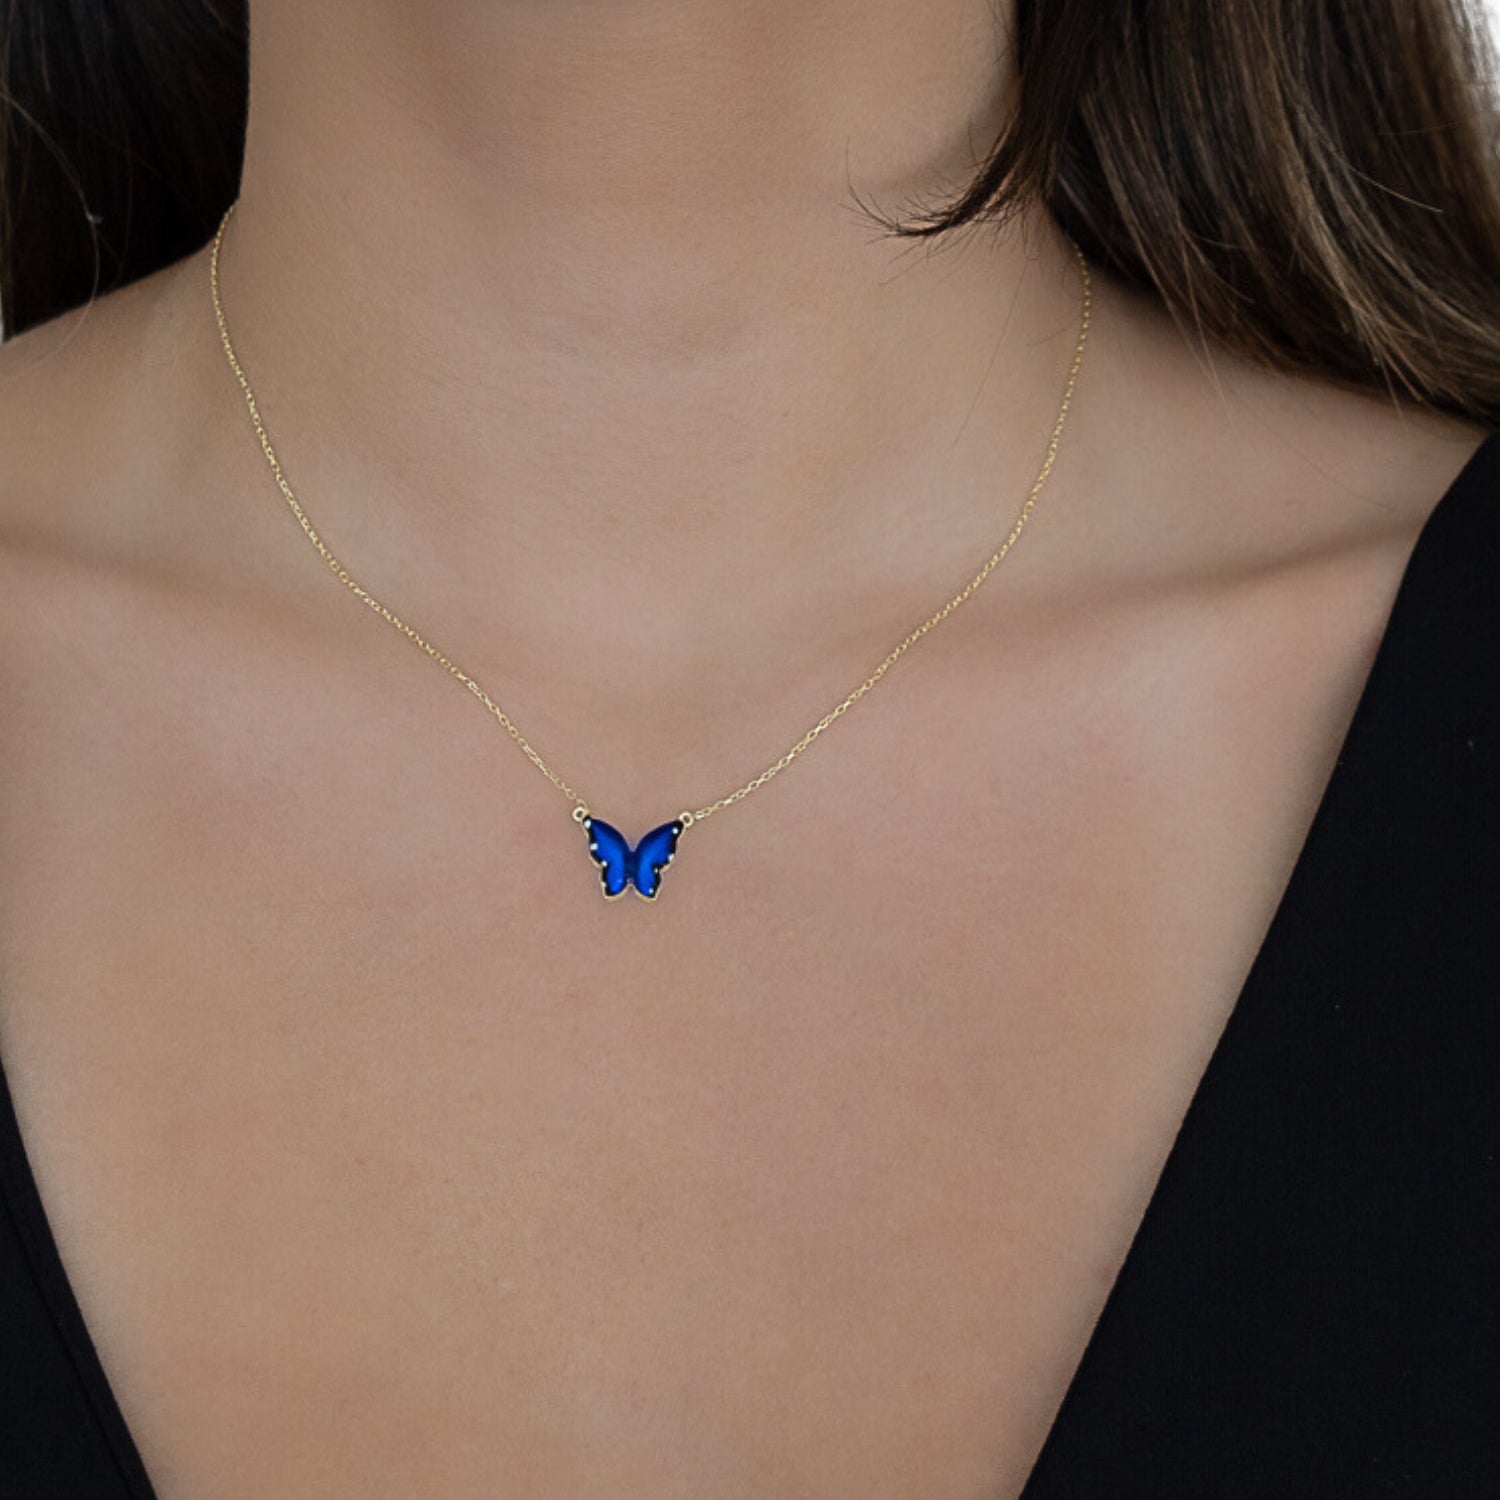 Model wearing the Gold Spiritual Blue Enamel Butterfly Necklace, radiating confidence and embracing the symbolism of transformation.